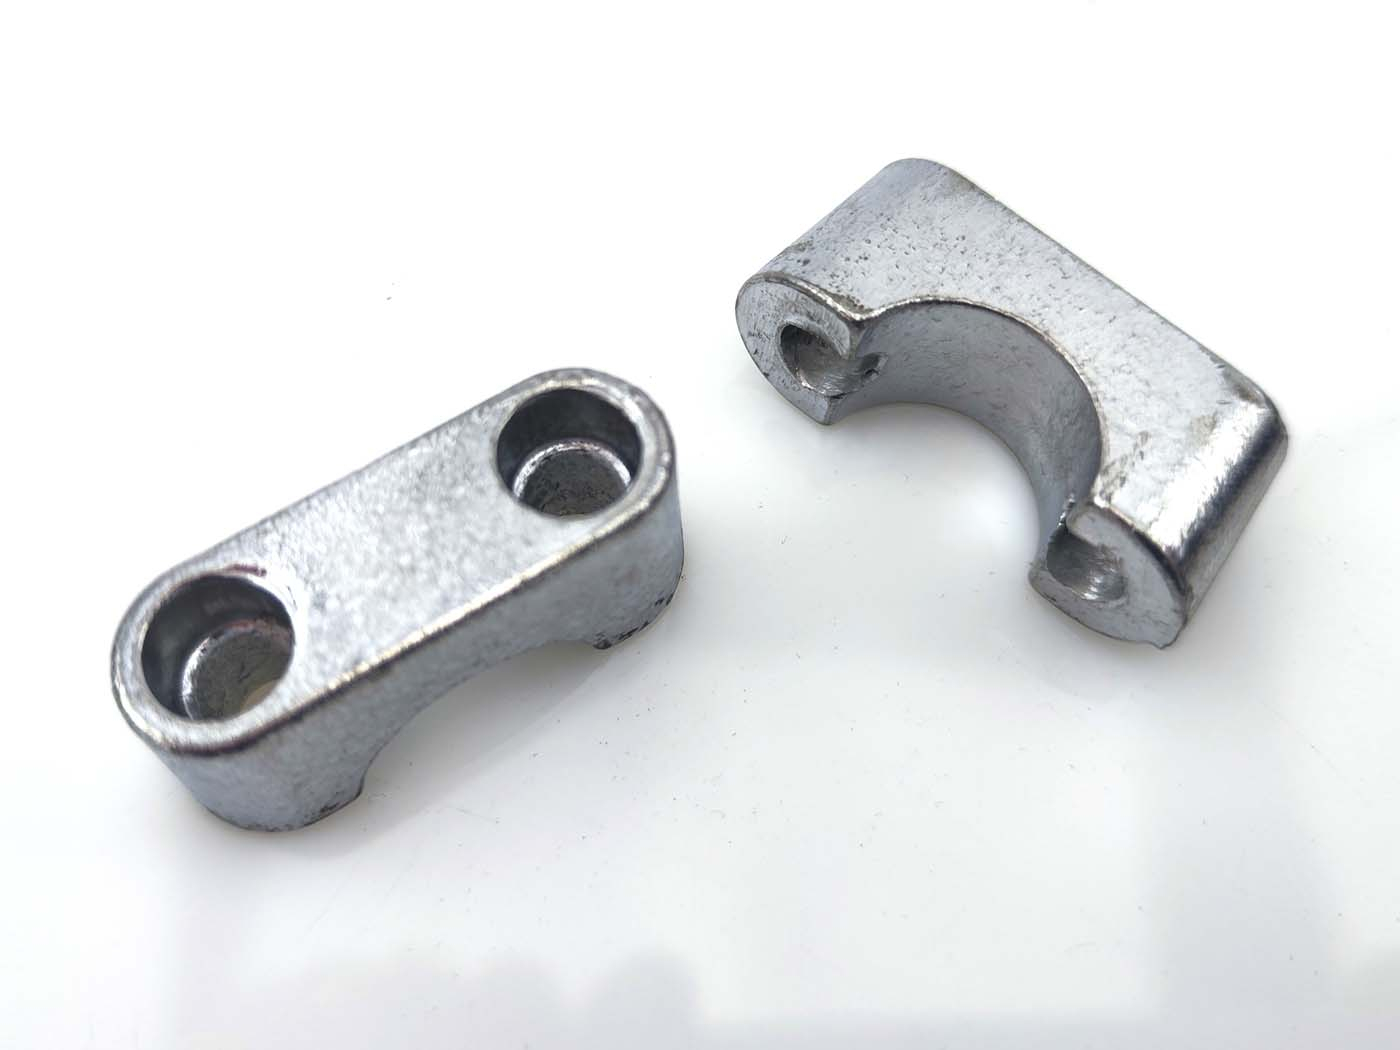 Handlebar Clamps EBR 2 Pieces 22mm Handlebar 28mm Mounting Distance For Hercules Prima, KTM, Puch Maxi, Peugeot Moped Moped